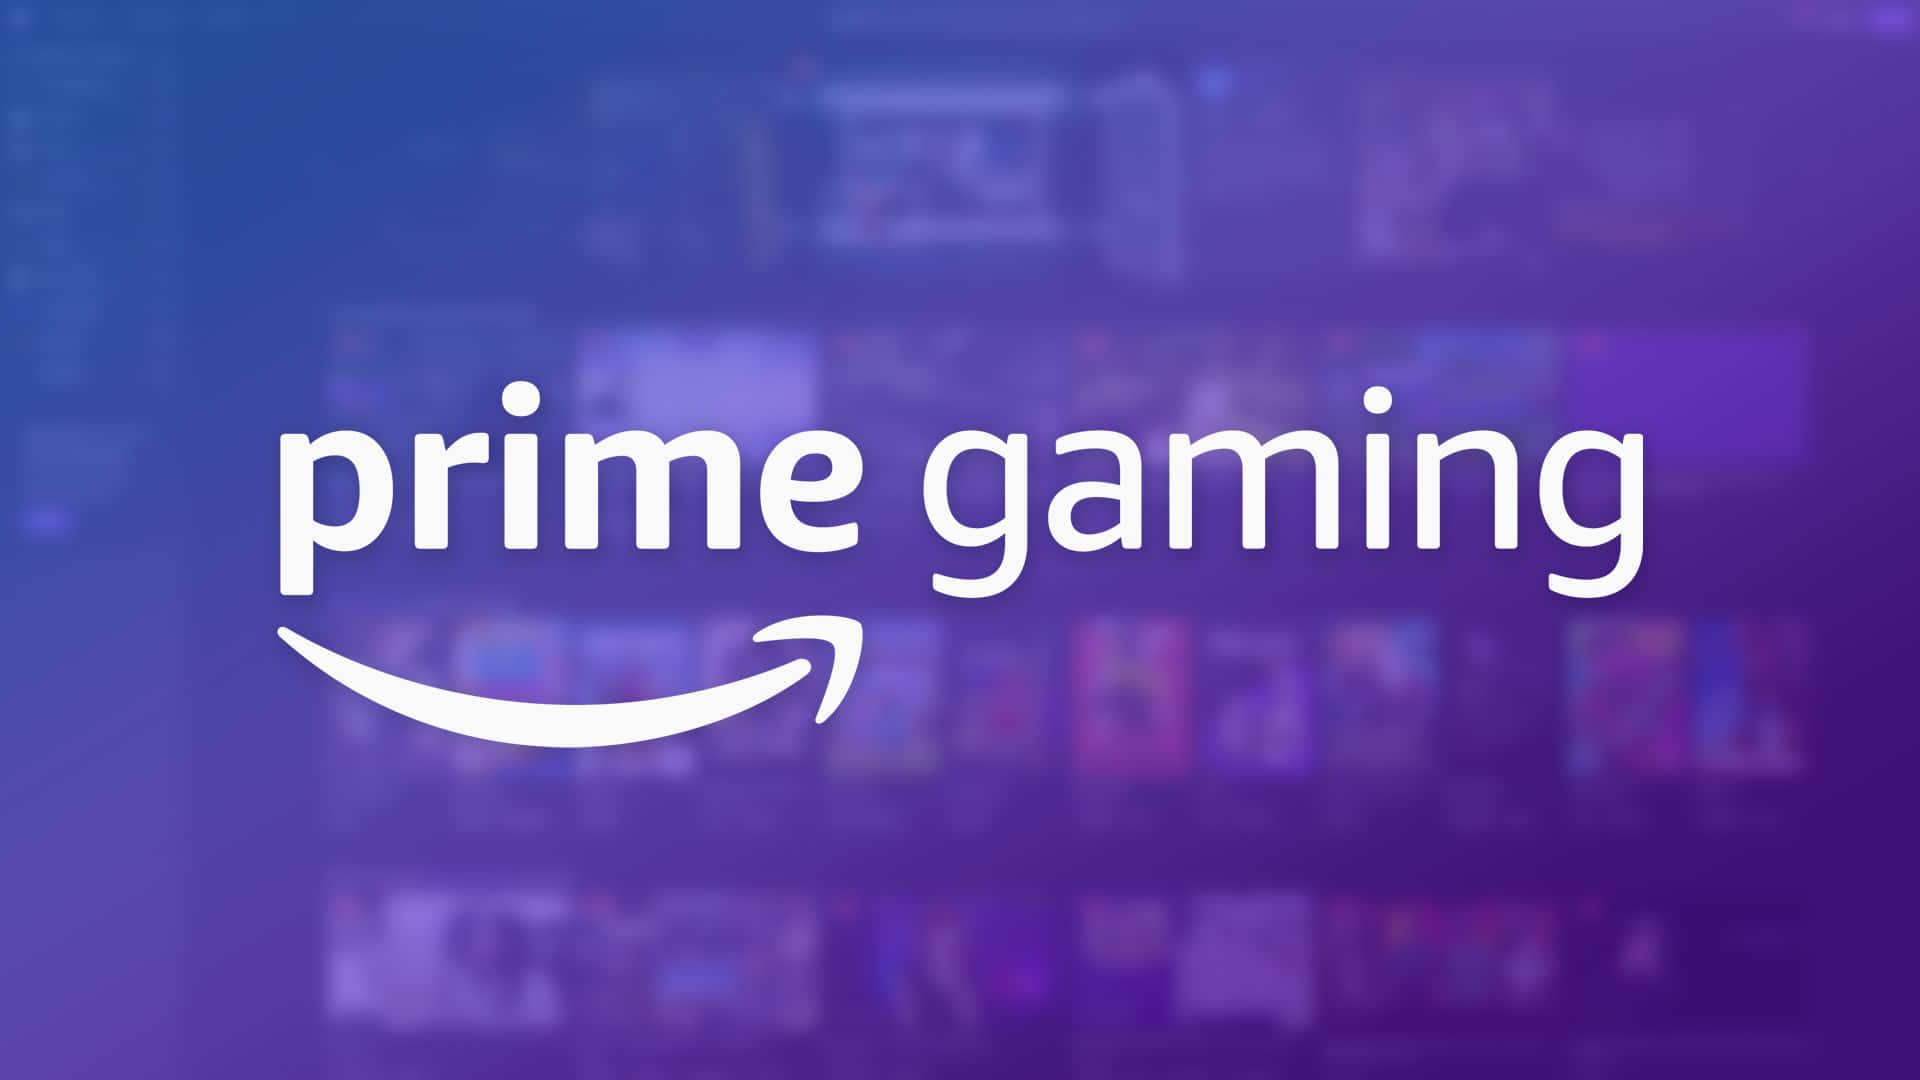 prime gaming distributes 25 free games to its subscribers!